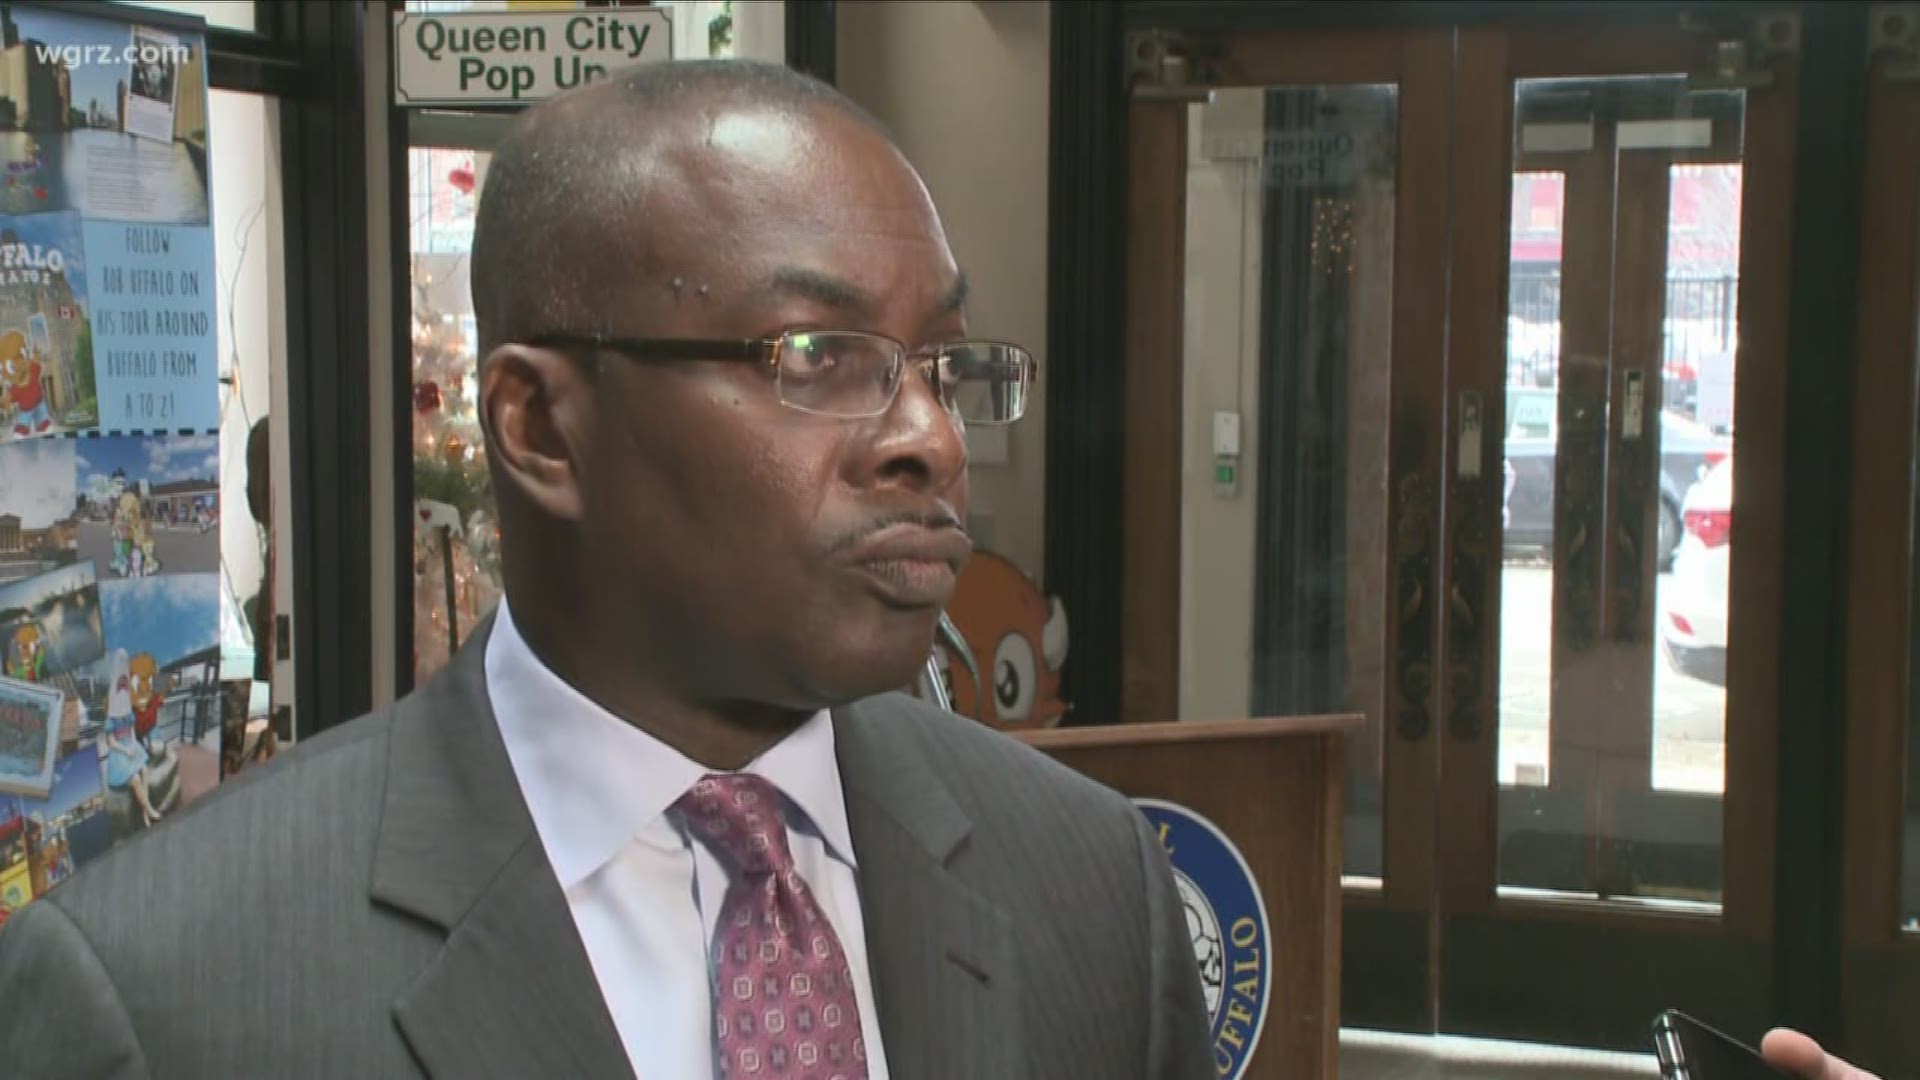 Buffalo's Mayor is standing by an old friend, even though that friend may be a target in a federal investigation.